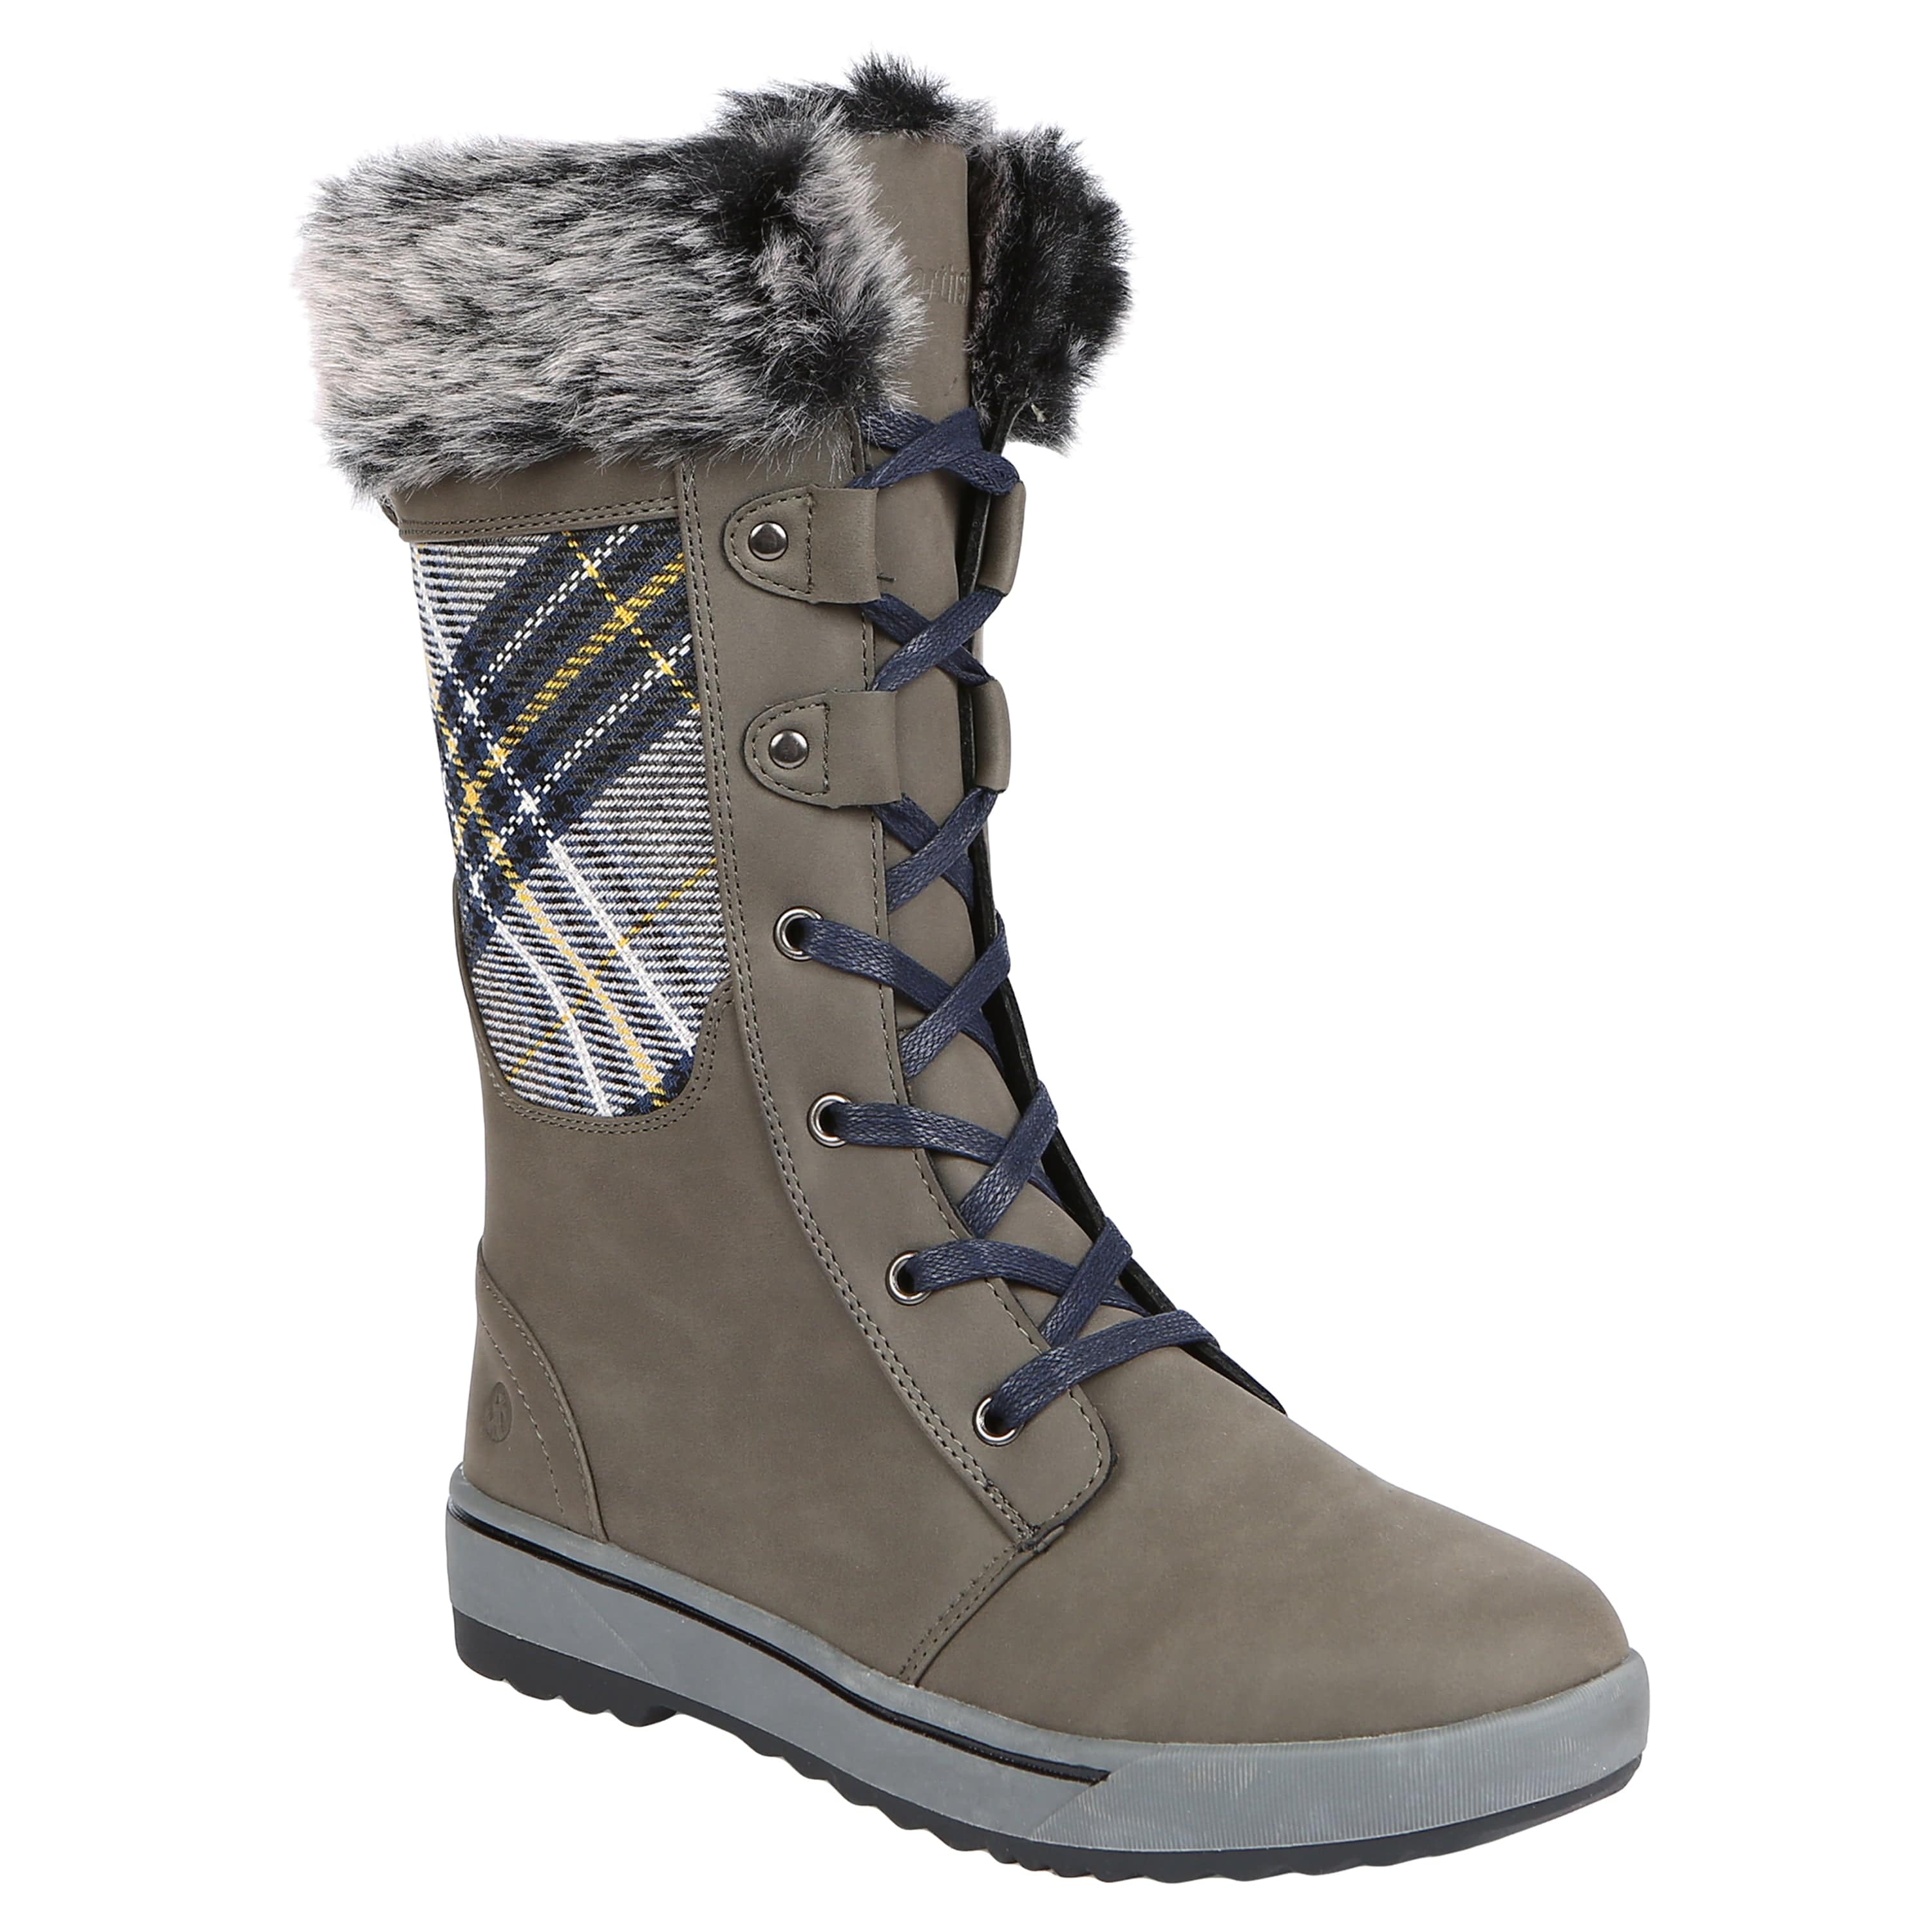 Women's Bishop SE Cold Weather Snow Boot - Northside USA